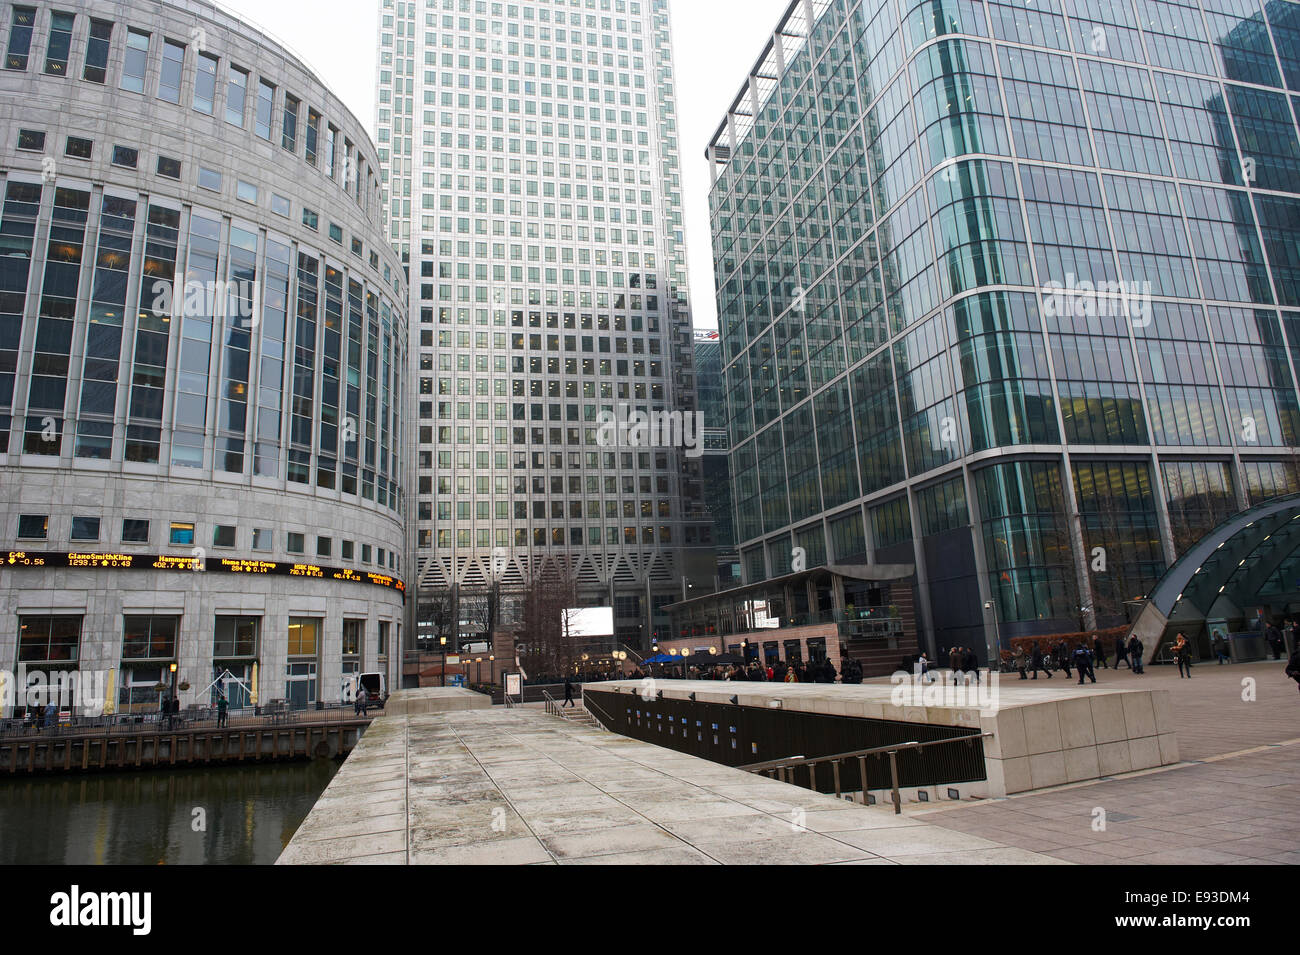 Ground view of Reuters headquarters (left) and One Canada Square (right), Finanicial District, Canary Wharf, London Stock Photo